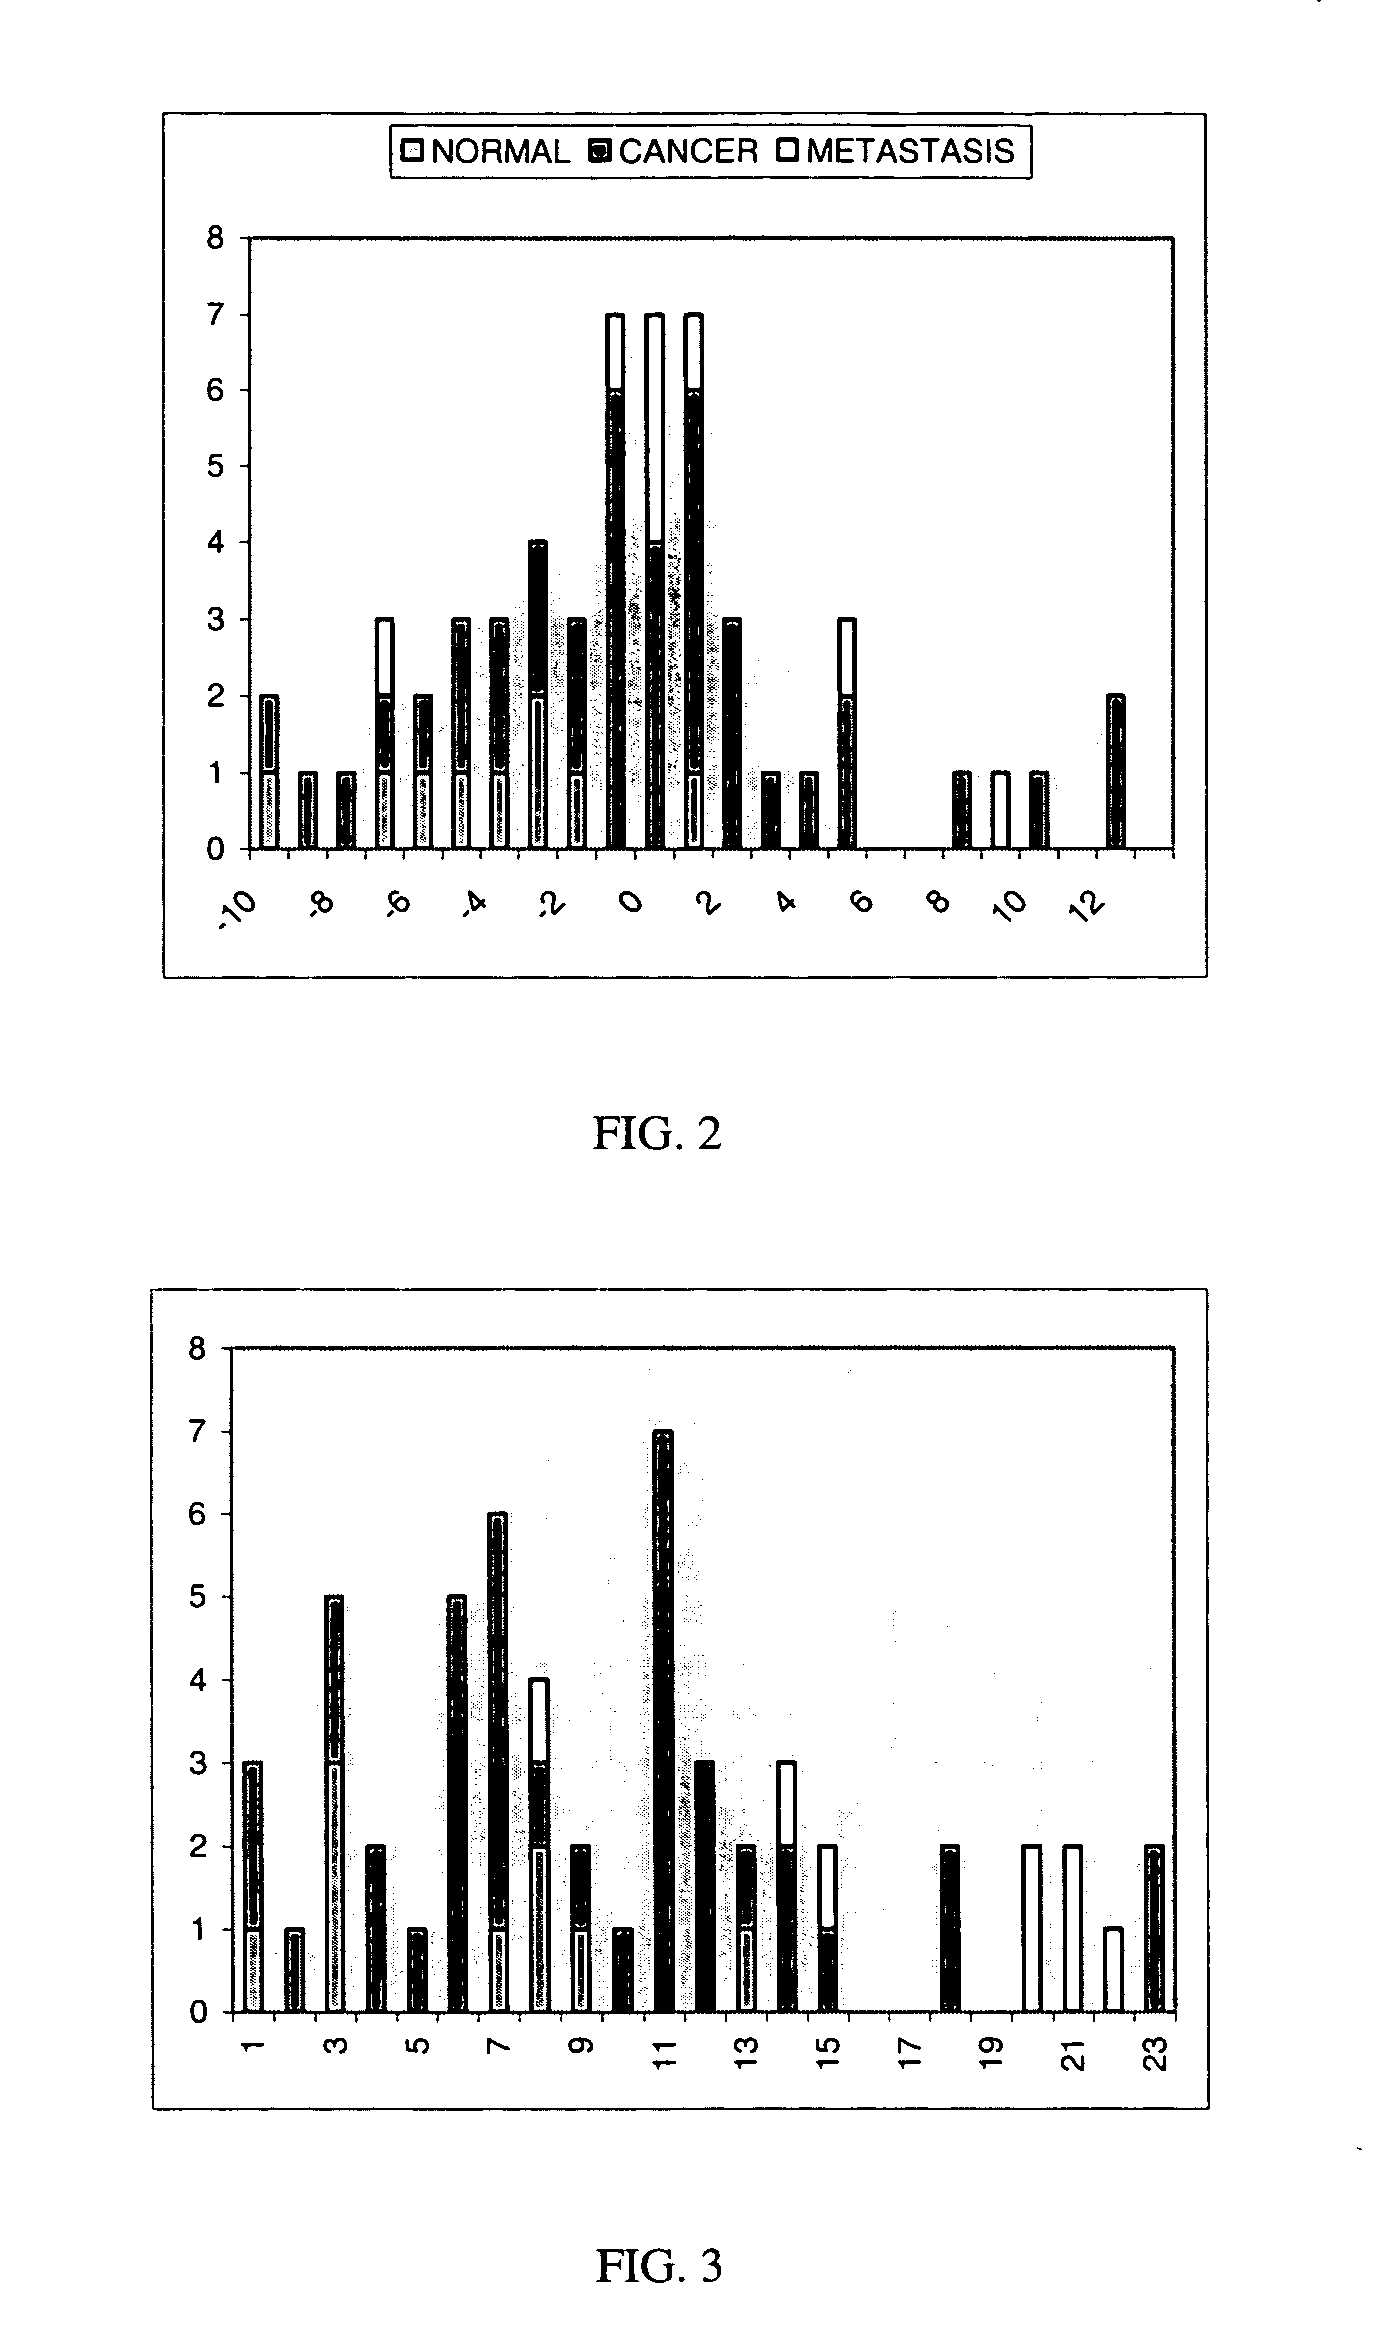 System and methods for scoring images of a tissue micro array